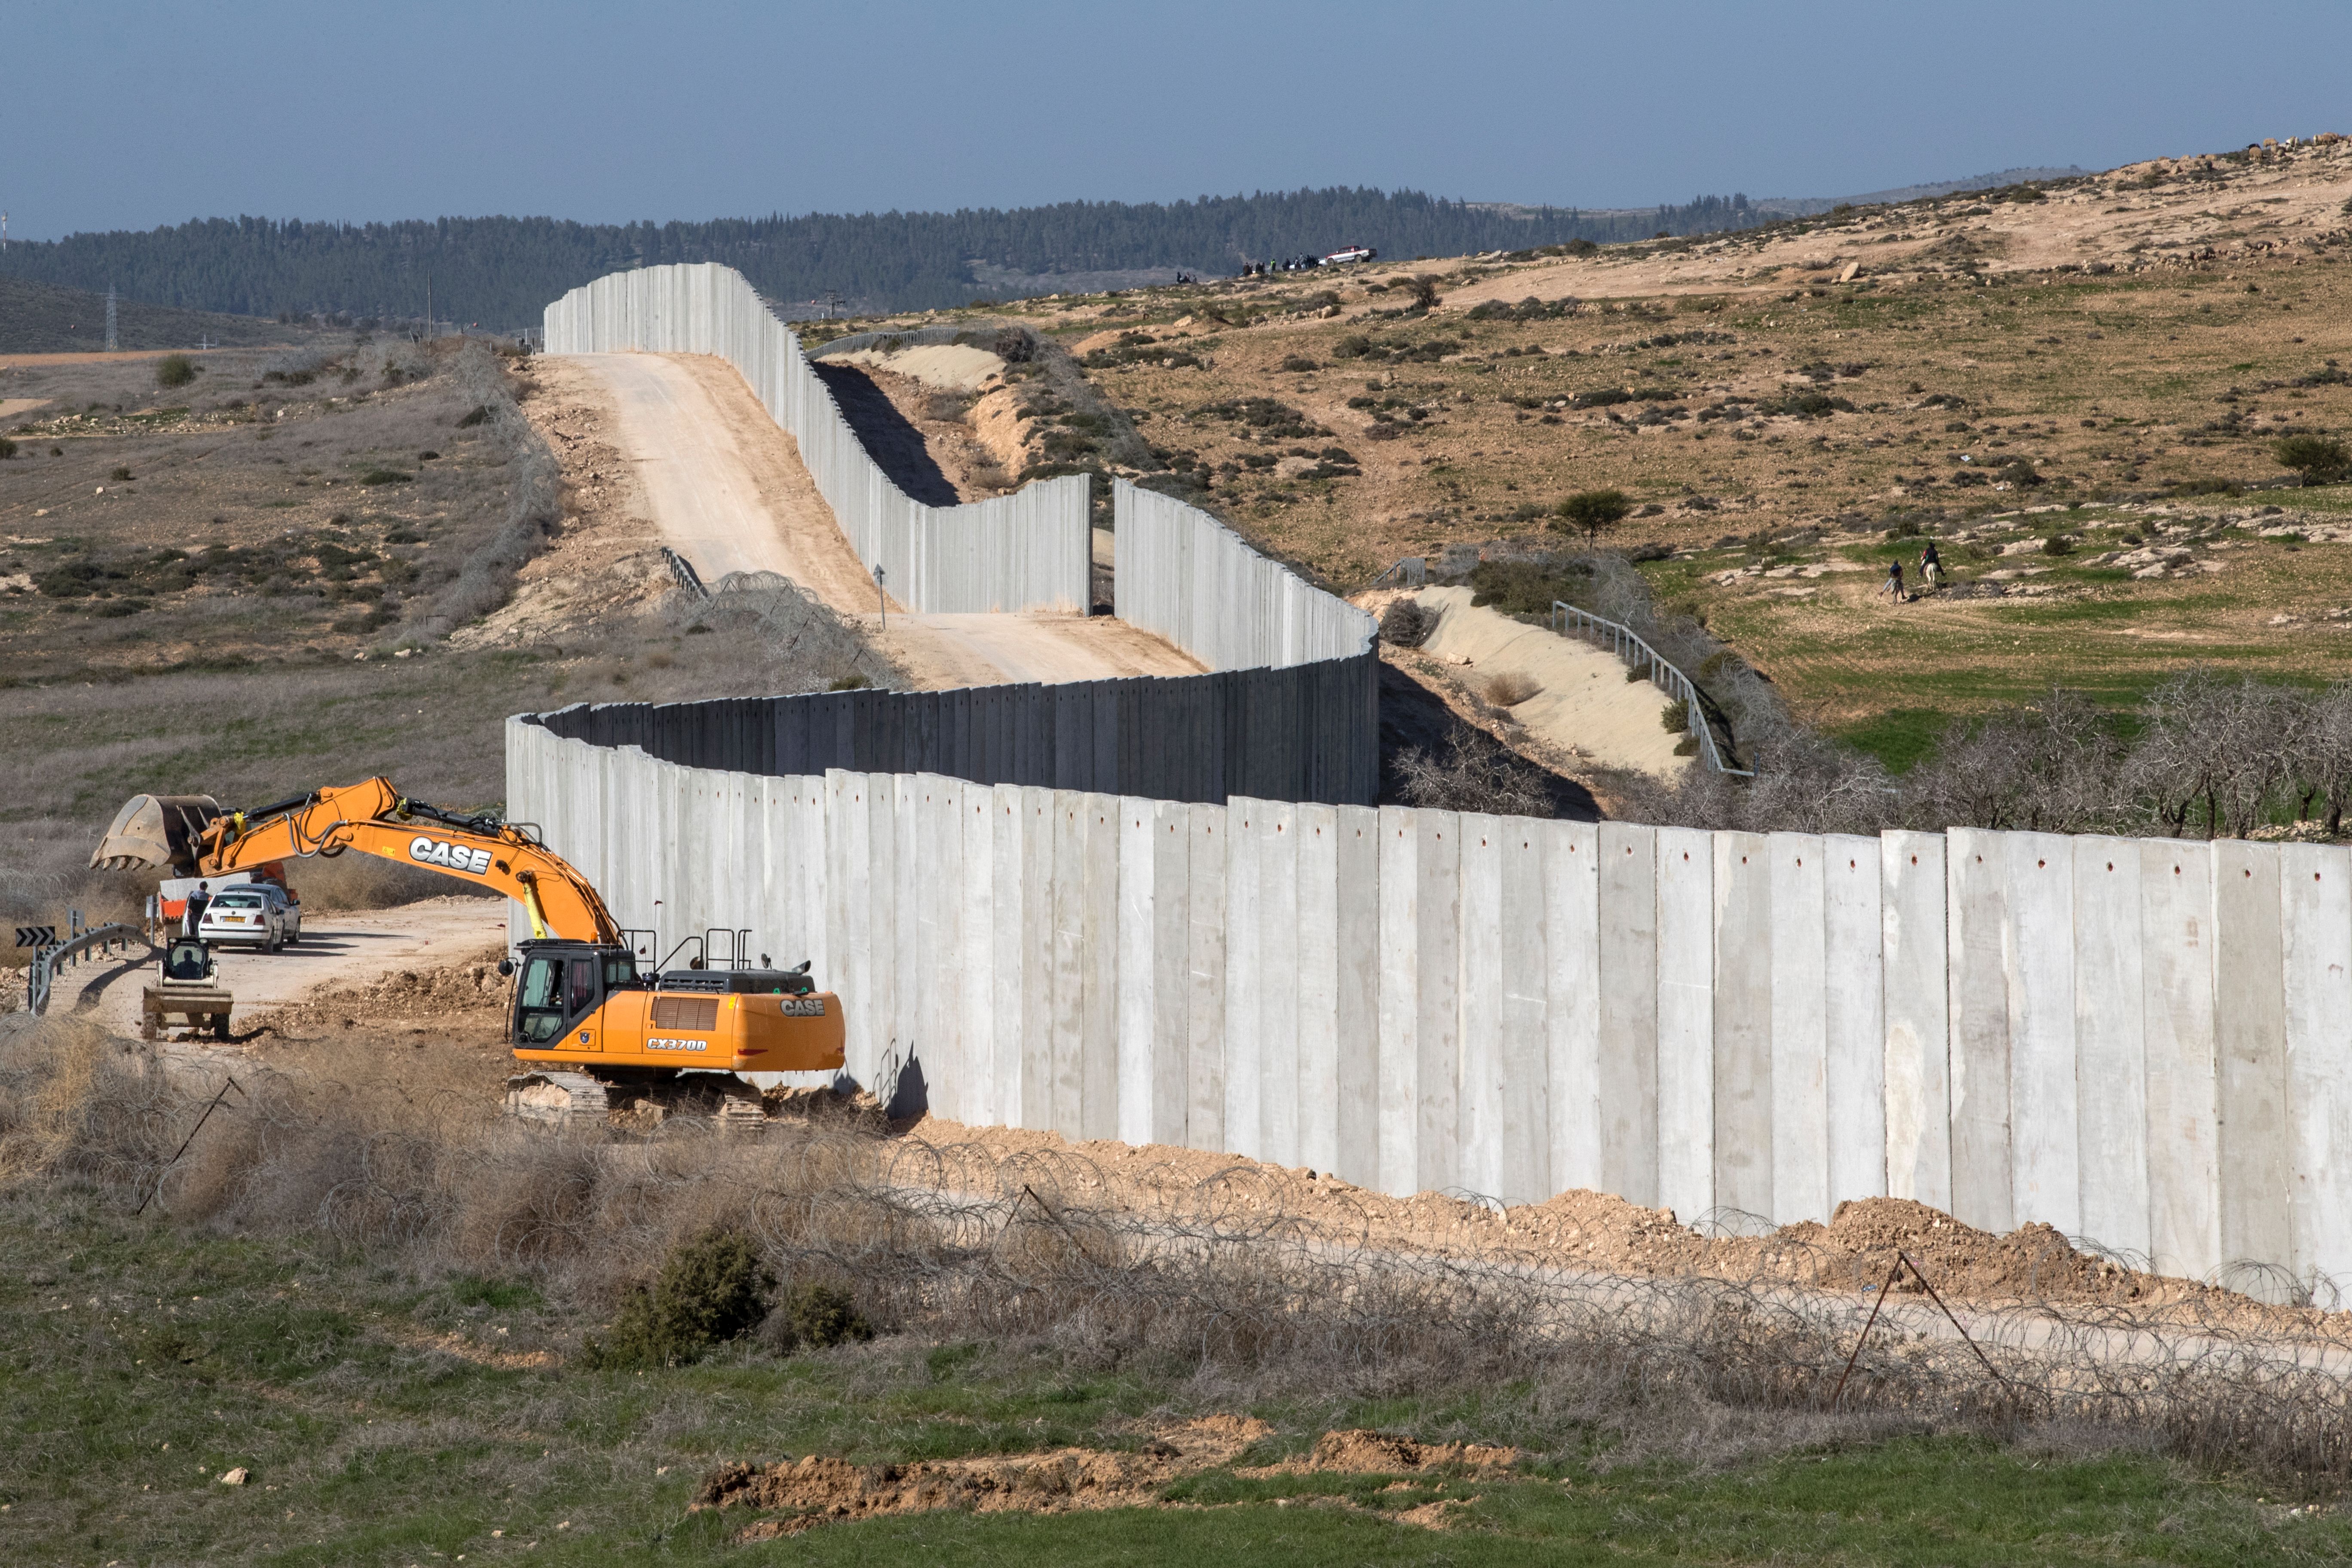 A picture taken near the southern kibbutz of Lahav on February 7, 2017, shows workers building a new section of the controversial Israeli separation wall dividing Israel from the West Bank. (JACK GUEZ/AFP/Getty Images)